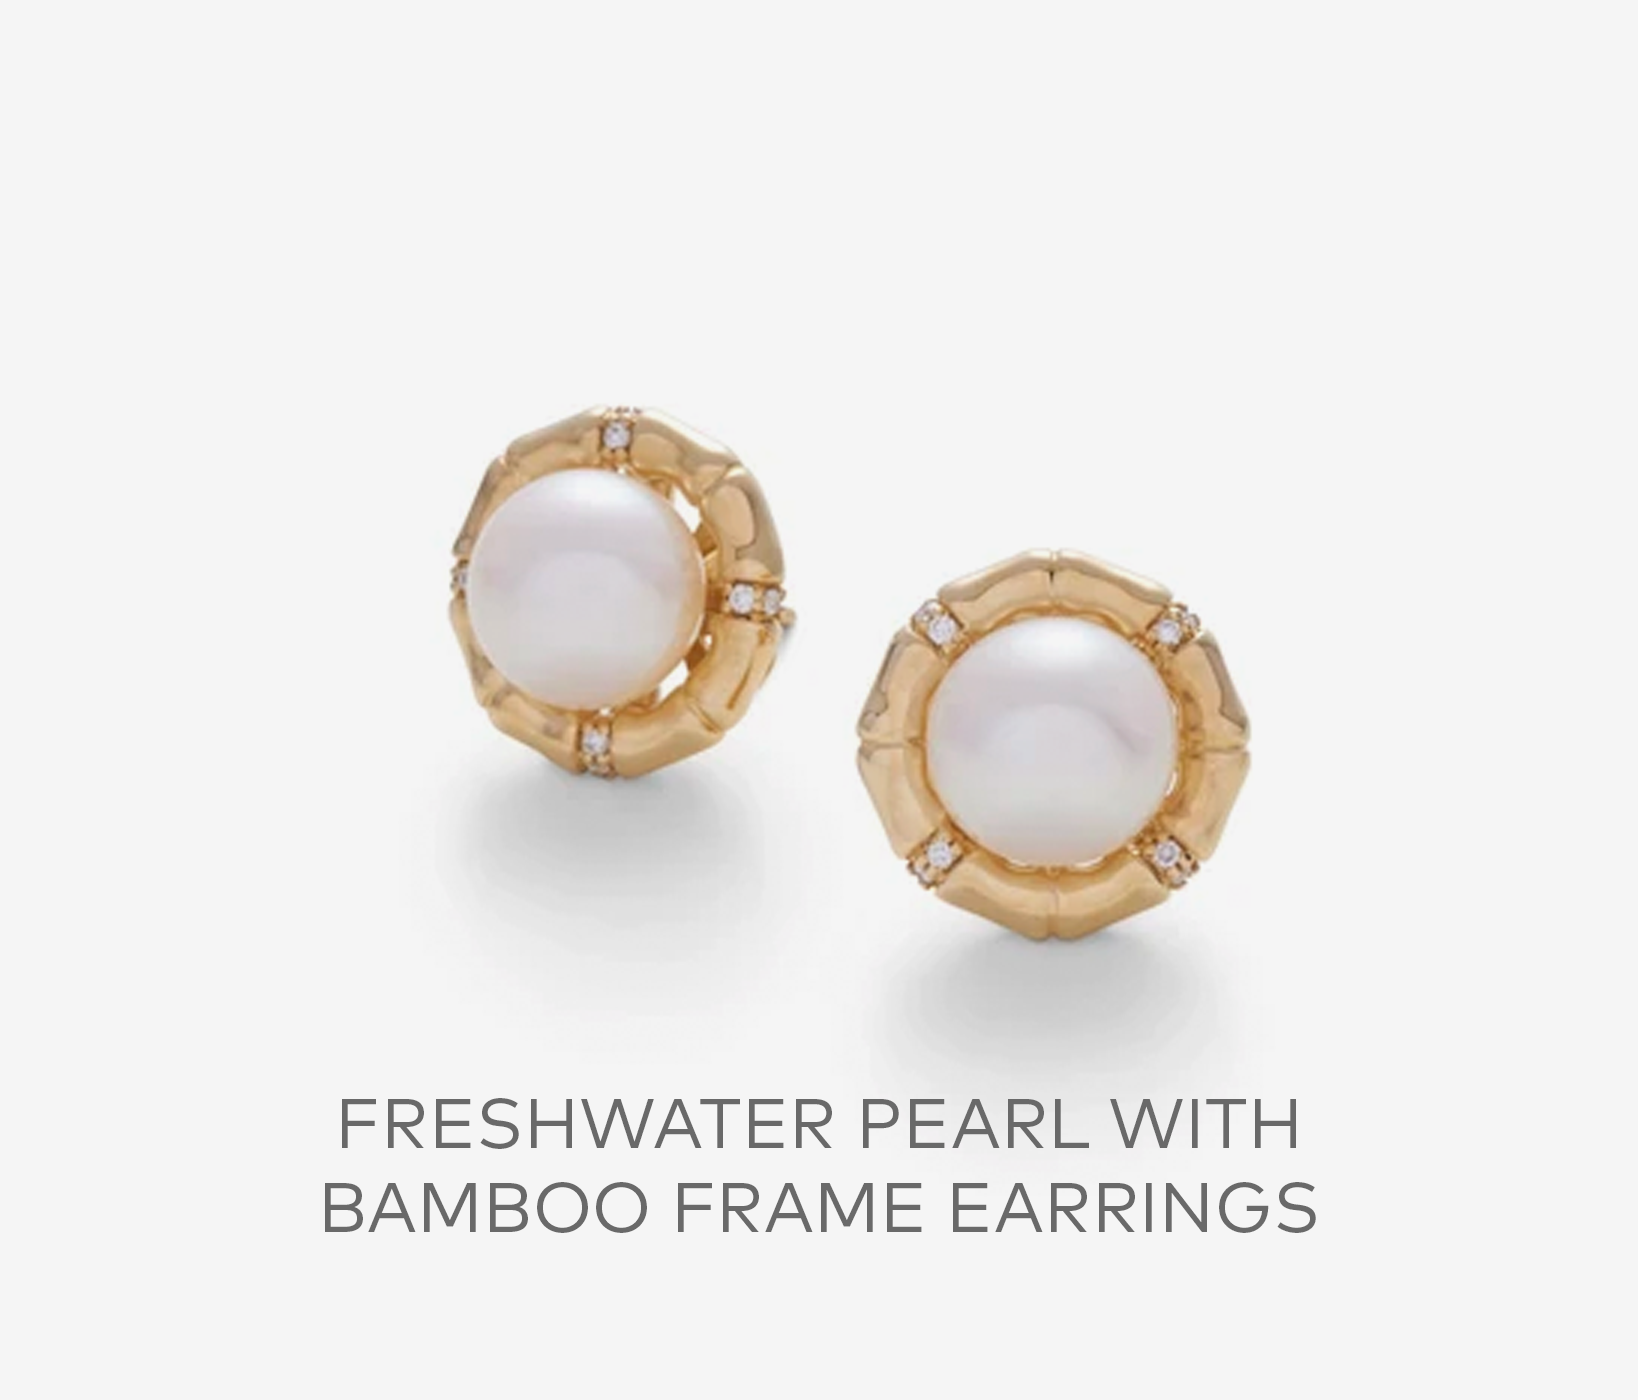 Freshwater Pearl with Bamboo Frame Earrings